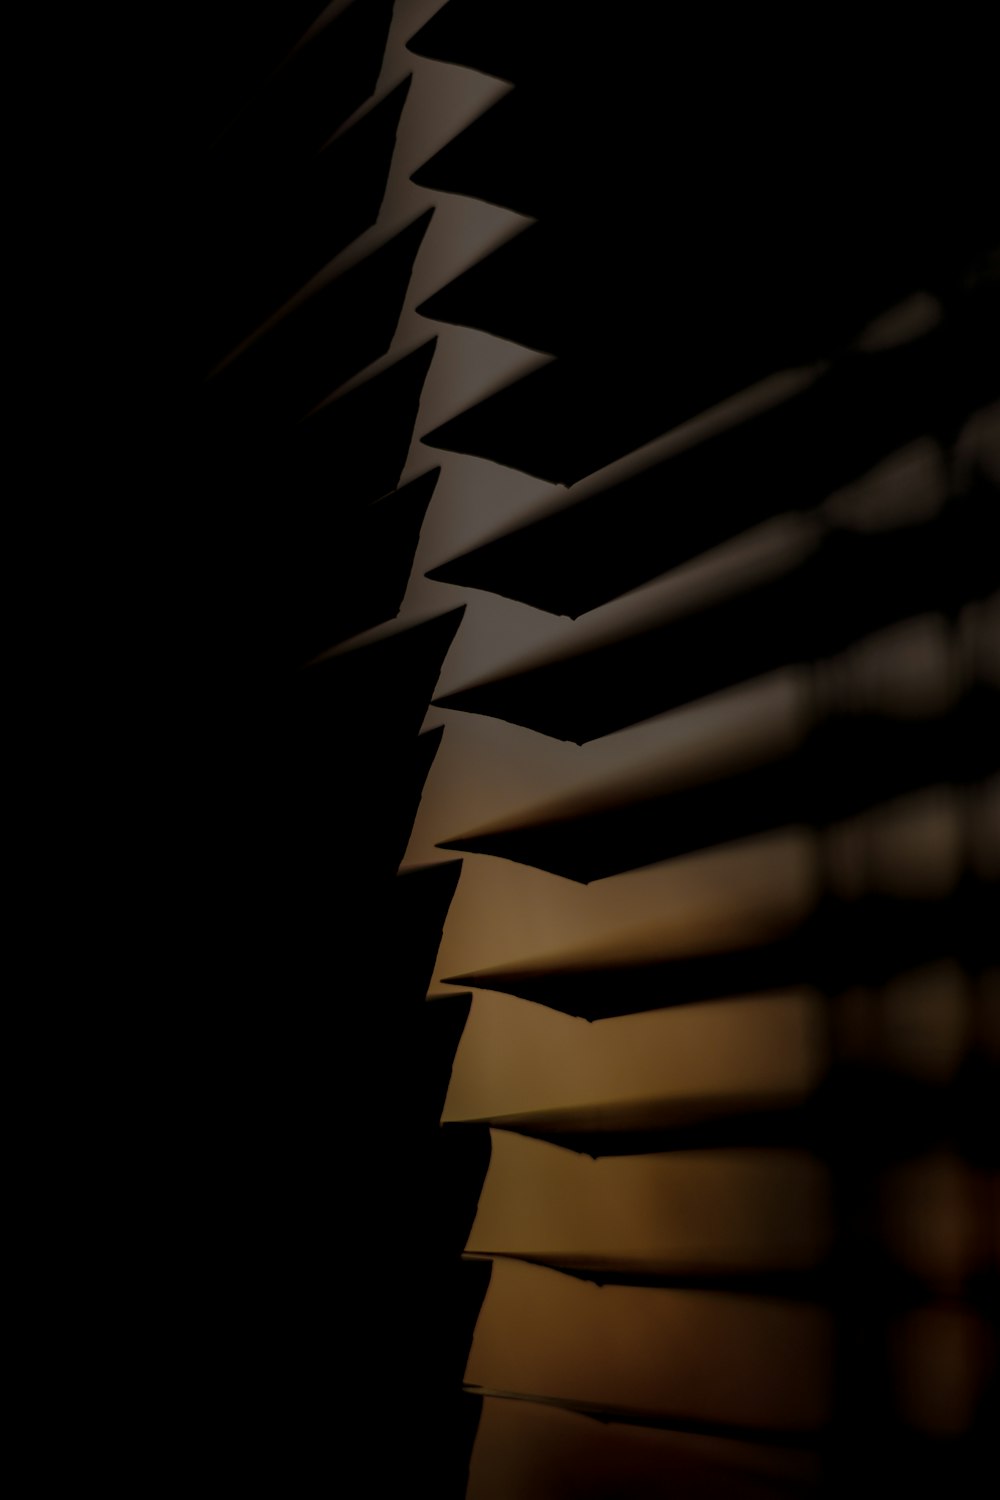 a close up of a window with blinds in the dark